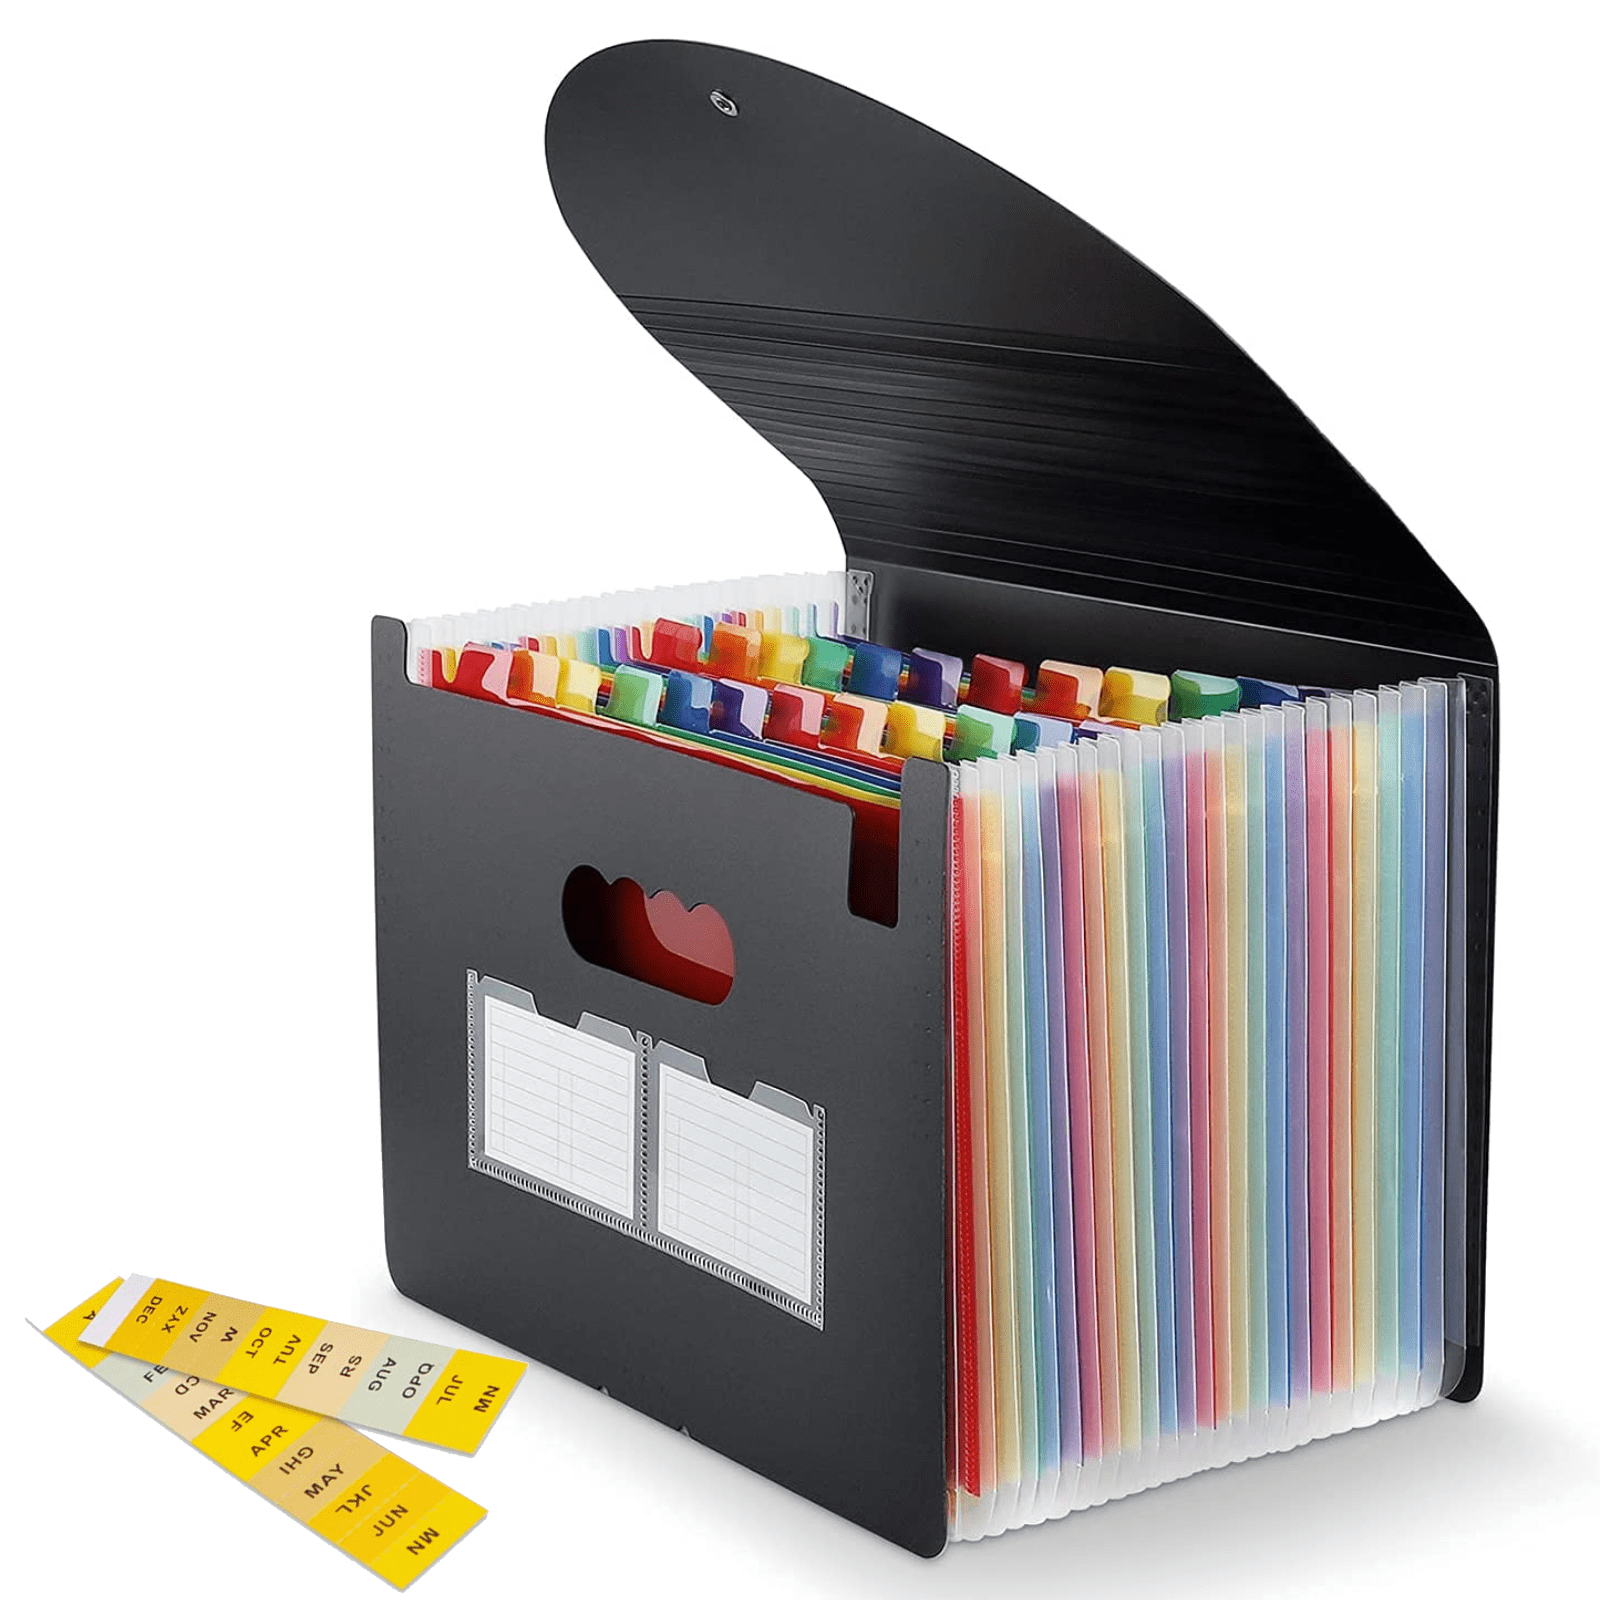 Accordion File Organizer, 25 Pockets Expanding File Folder, Portable Monthly Bill Receipt Documents Organizer, Colorful Tabs, Letter/A4 size, Black